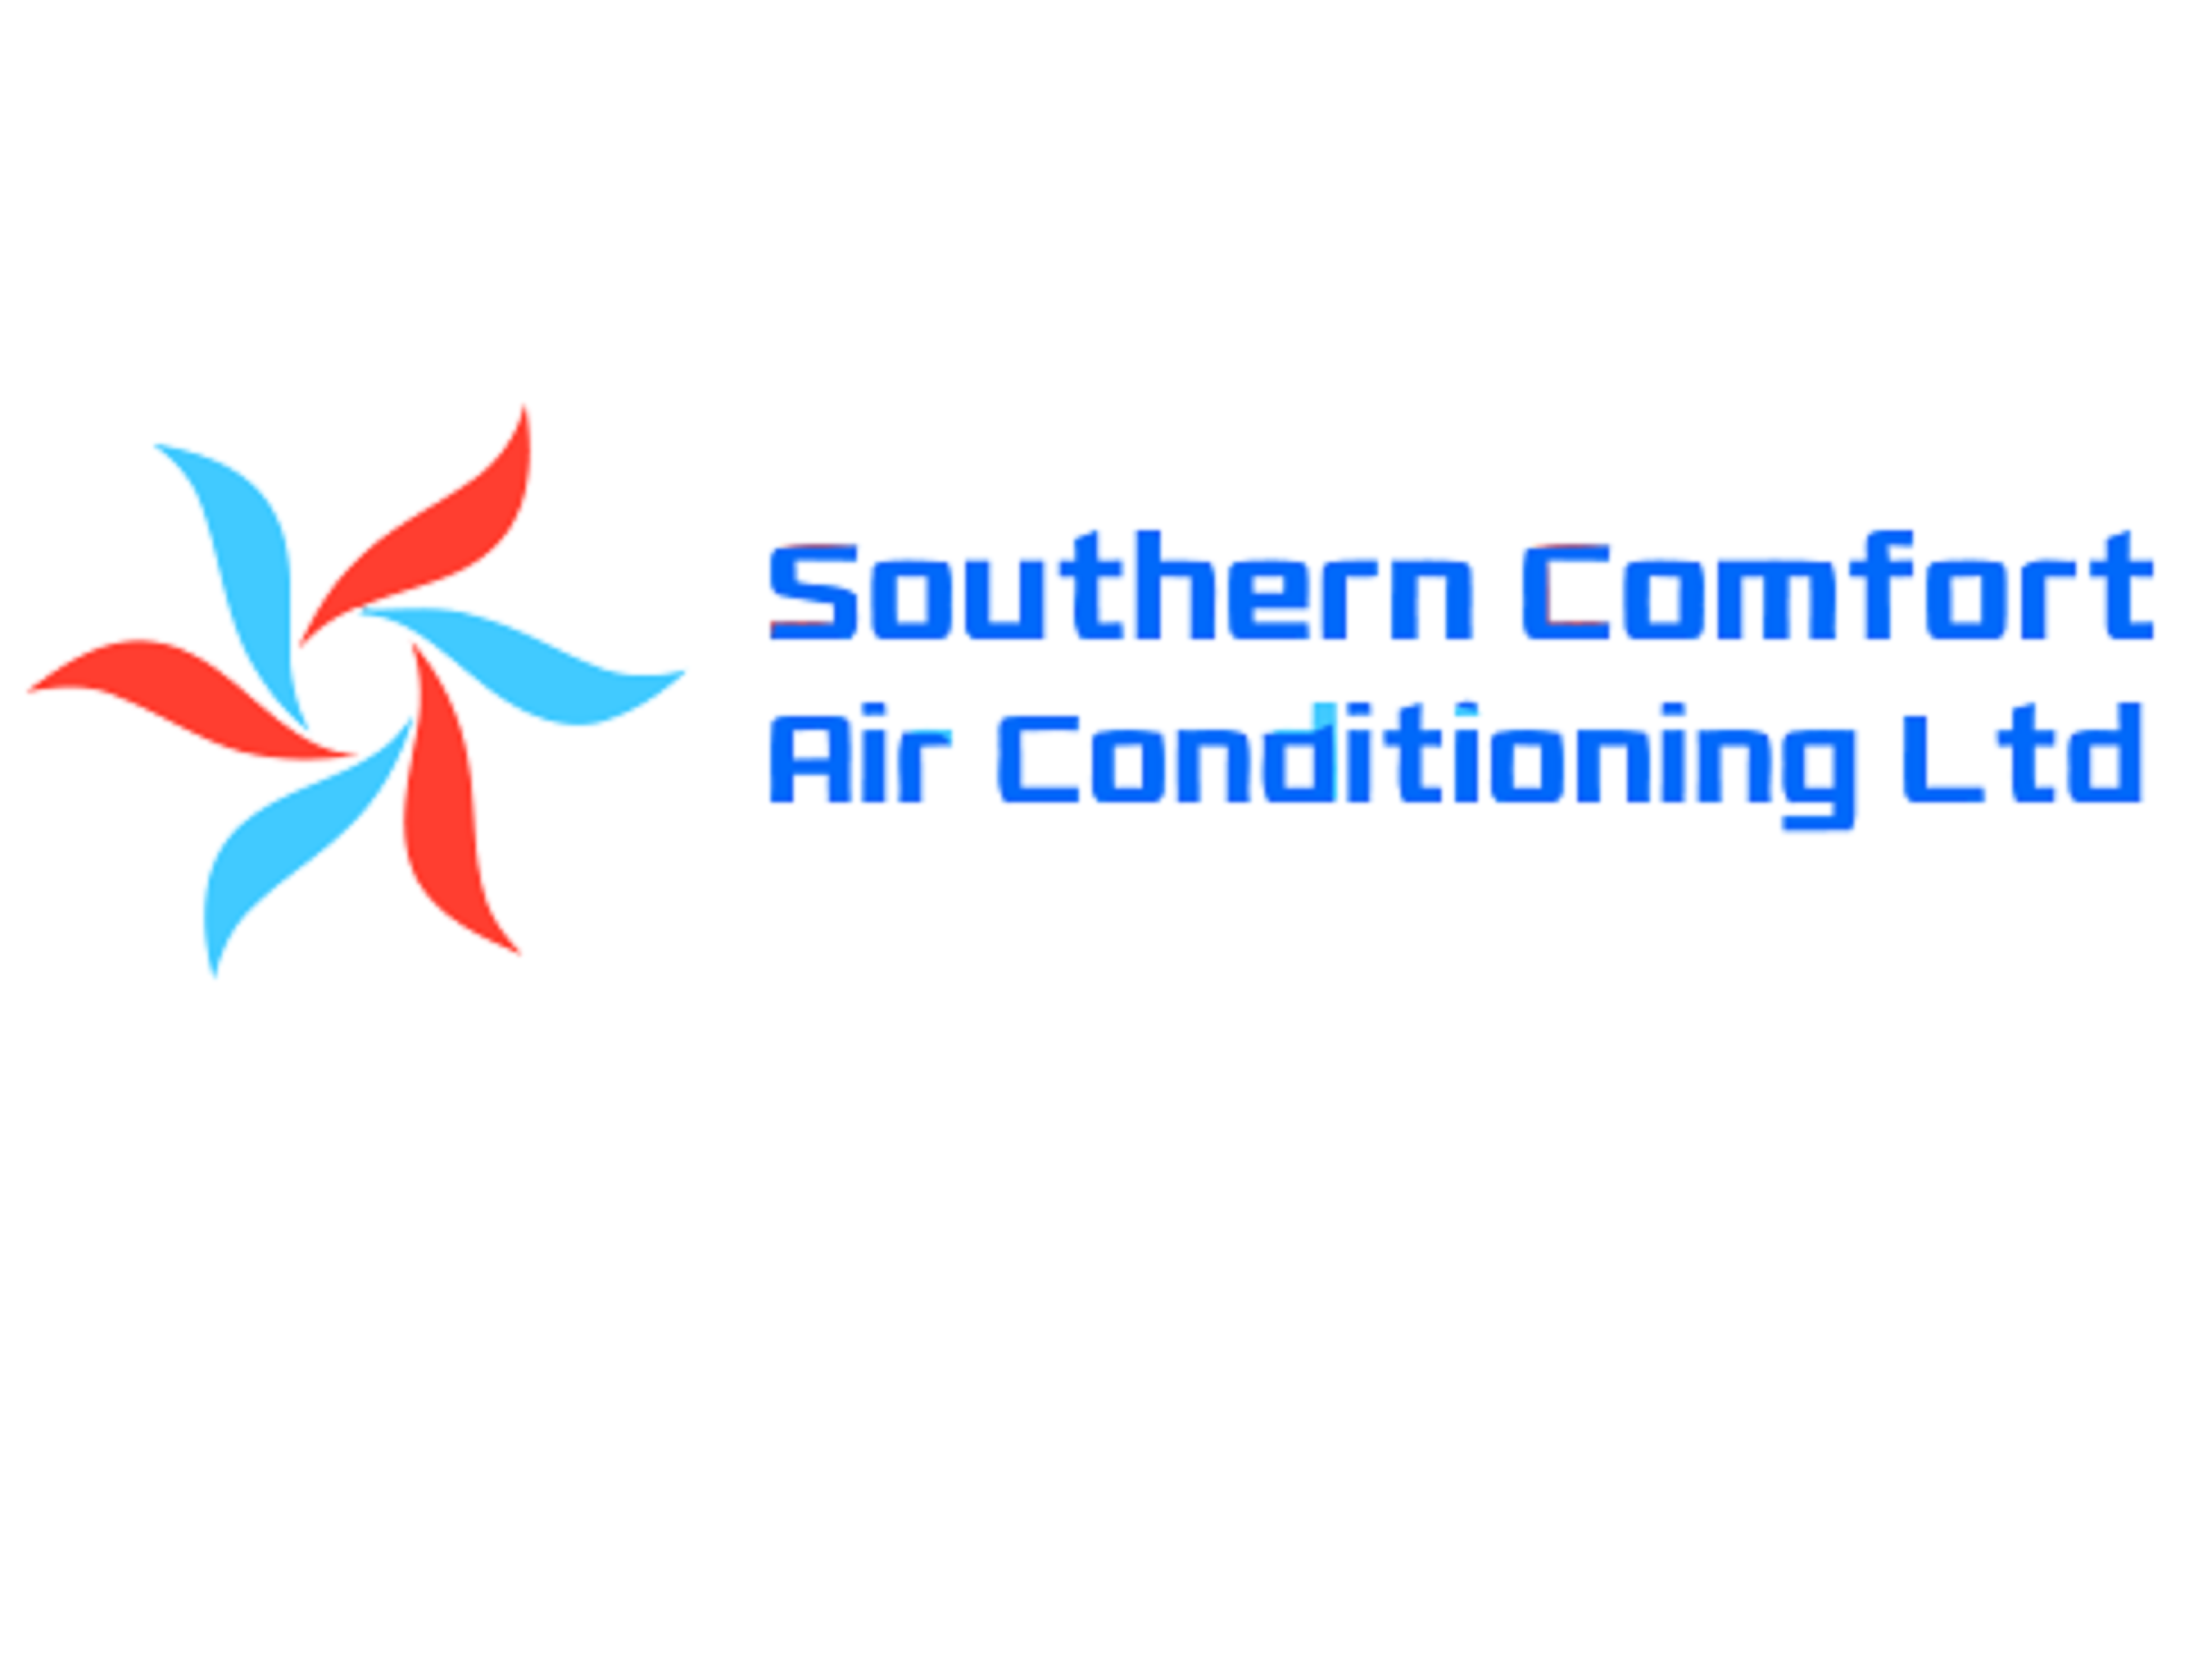 Southern Comfort Air Conditioning LTD